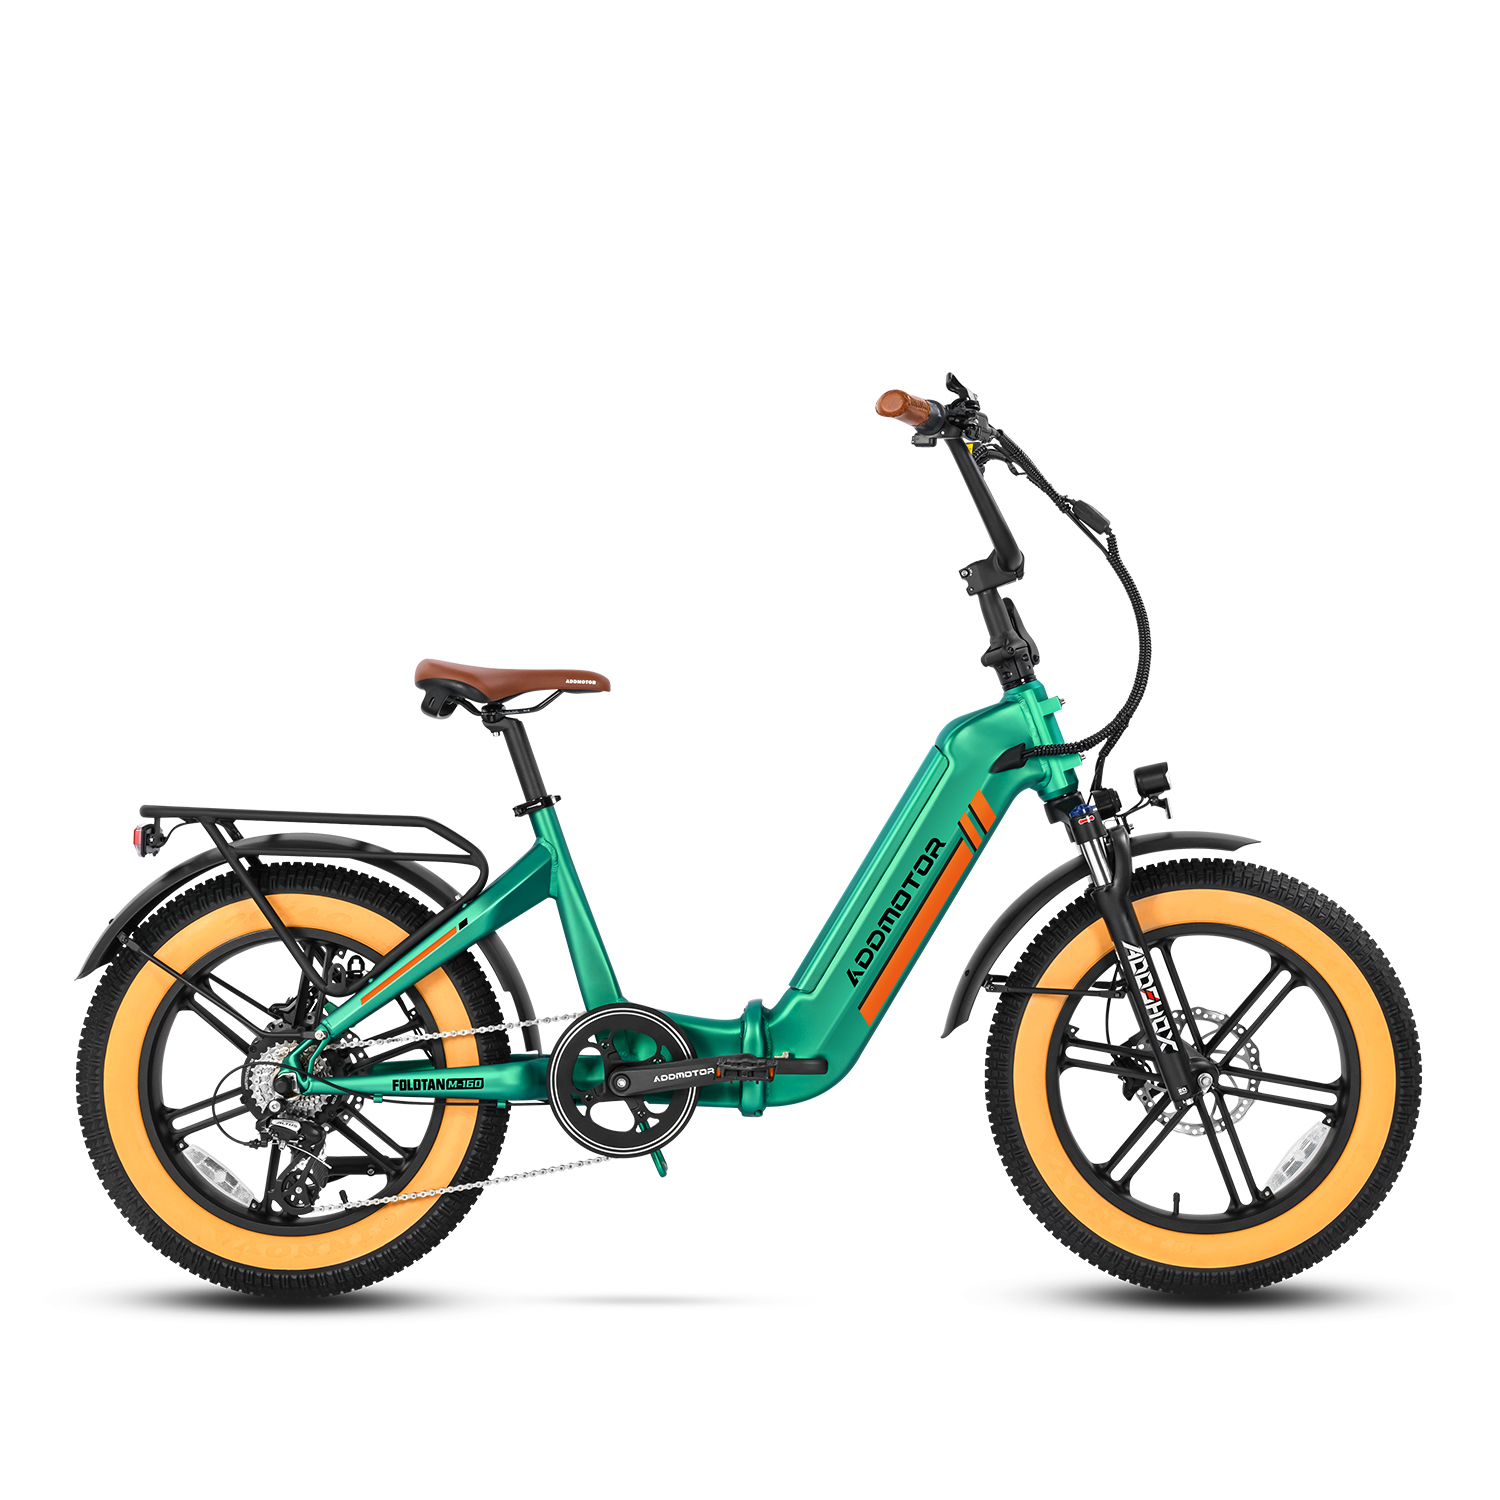 Addmotor Folding Electric Bicycle with Fat Tire Foldtan M-160 Built-In Battery Folding Electric Bike, Olive Green